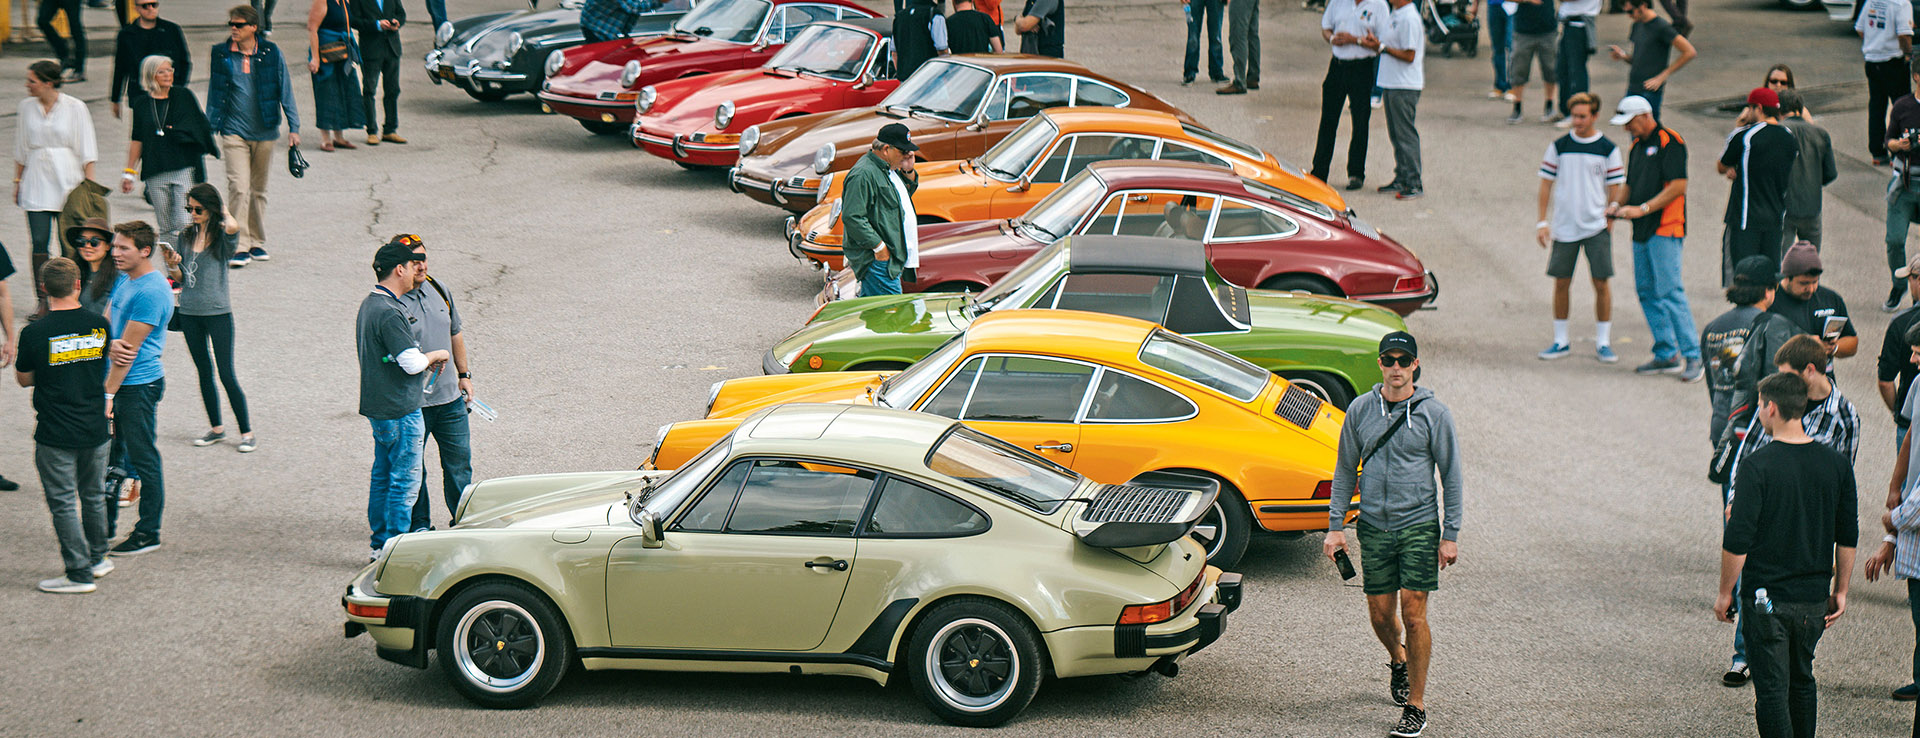 Large line-up of classic Porsche sportscars at show, urban location